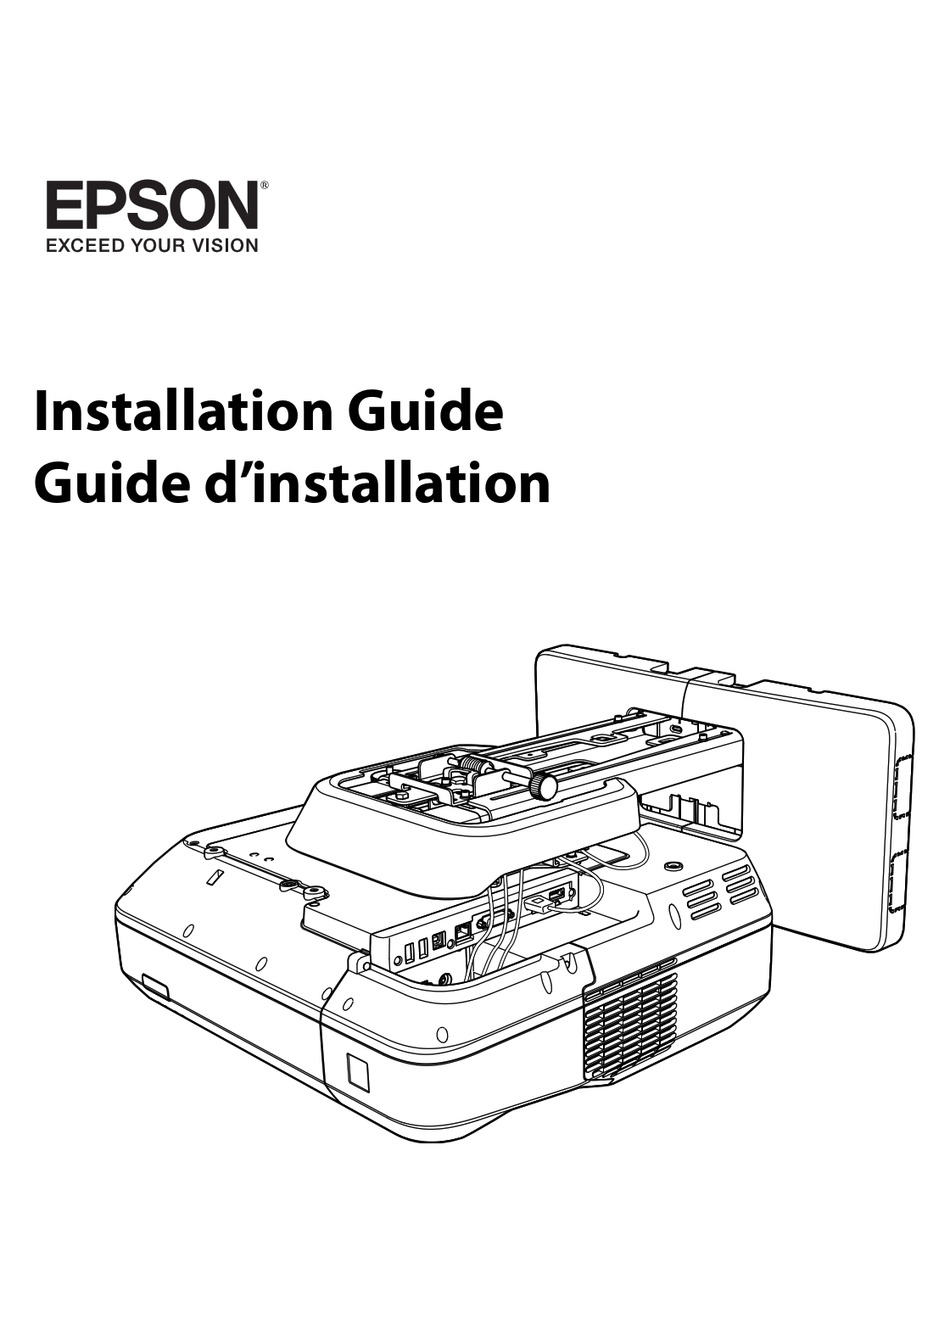 Epson ELPCK01 On Wall Cable Management Kit - Authorized Dealer